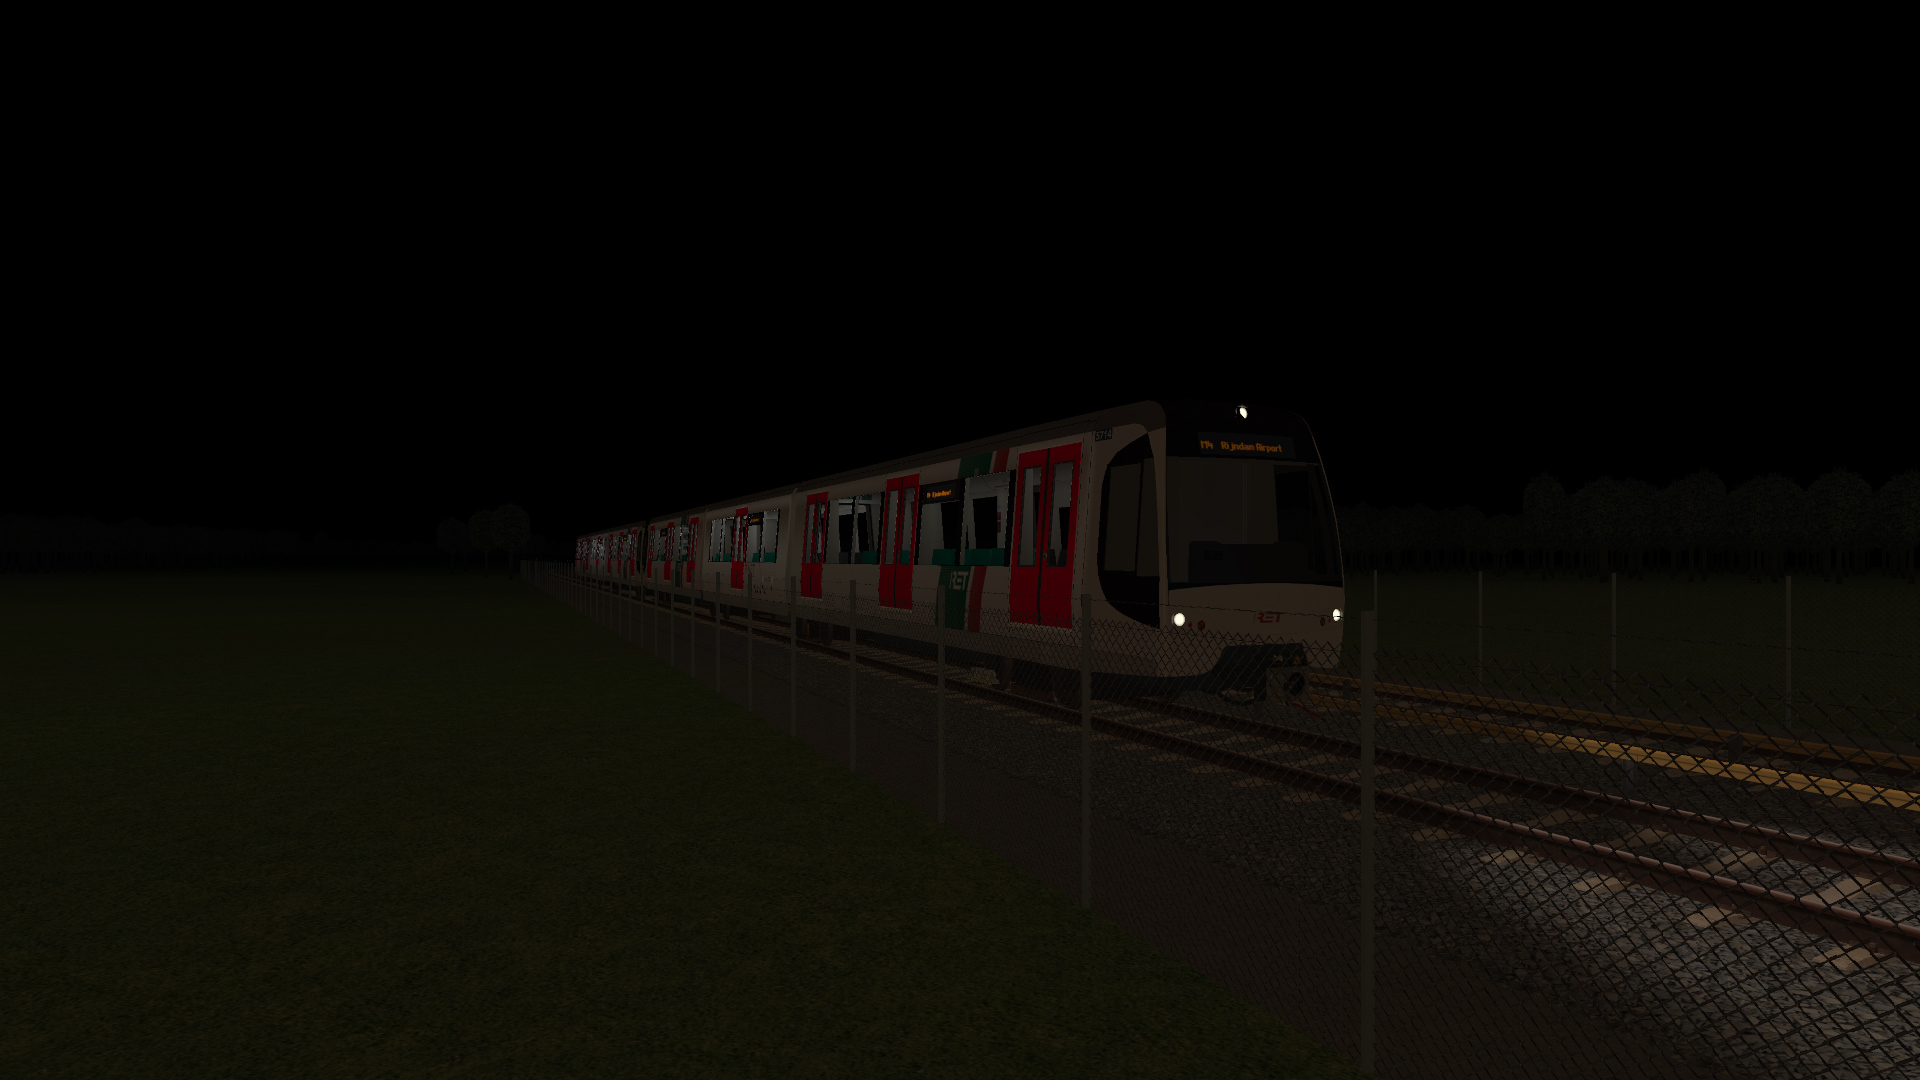 RET HSG3 EMU approaches 's-Gravendijk on the late night of 25/26th April 2024 with the 00:22 'Line M4' service to Rijndam Airport.